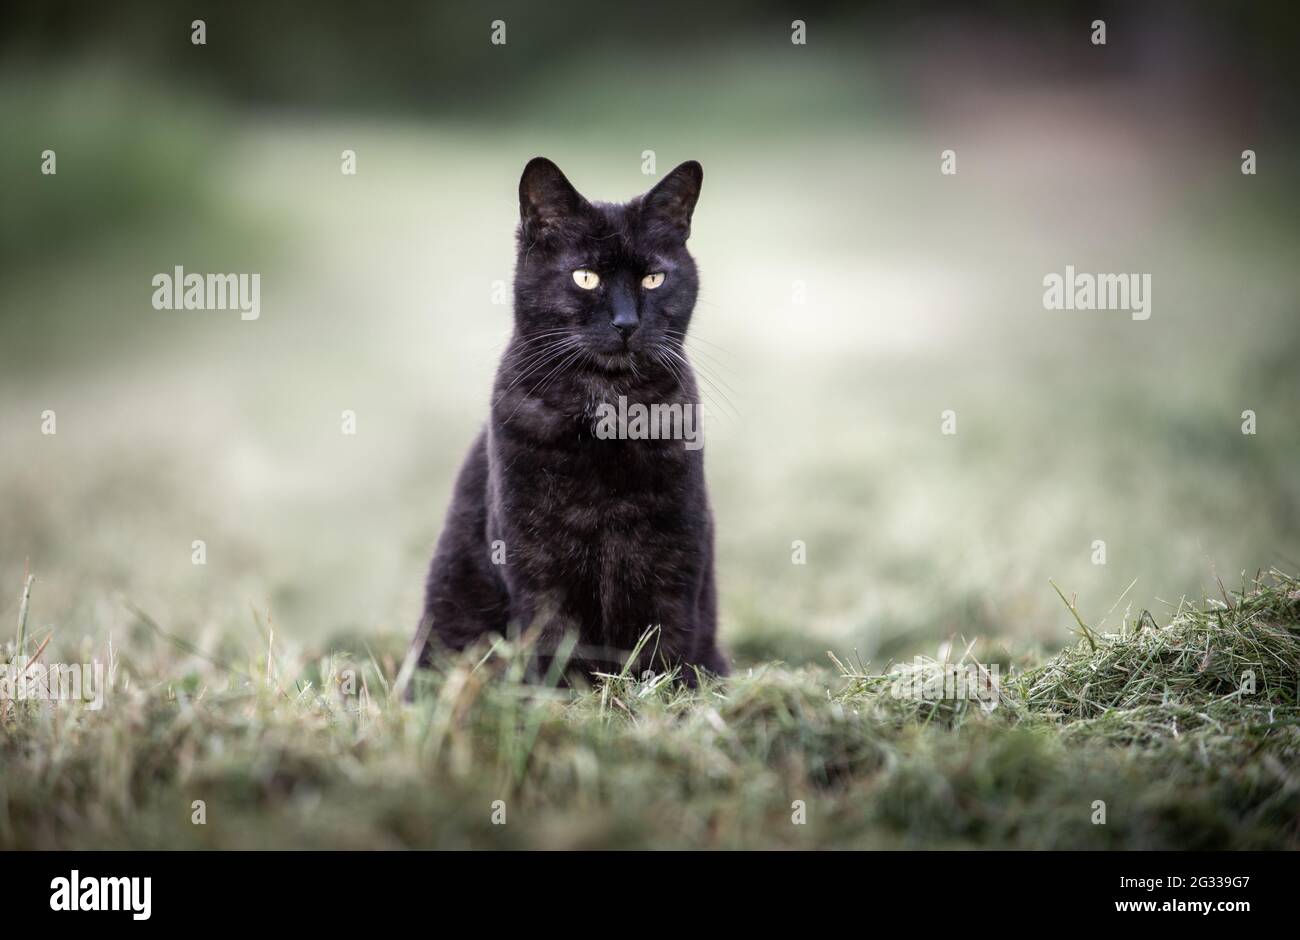 black cat sitting outdoor. yellow eyes. looking. Stock Photo